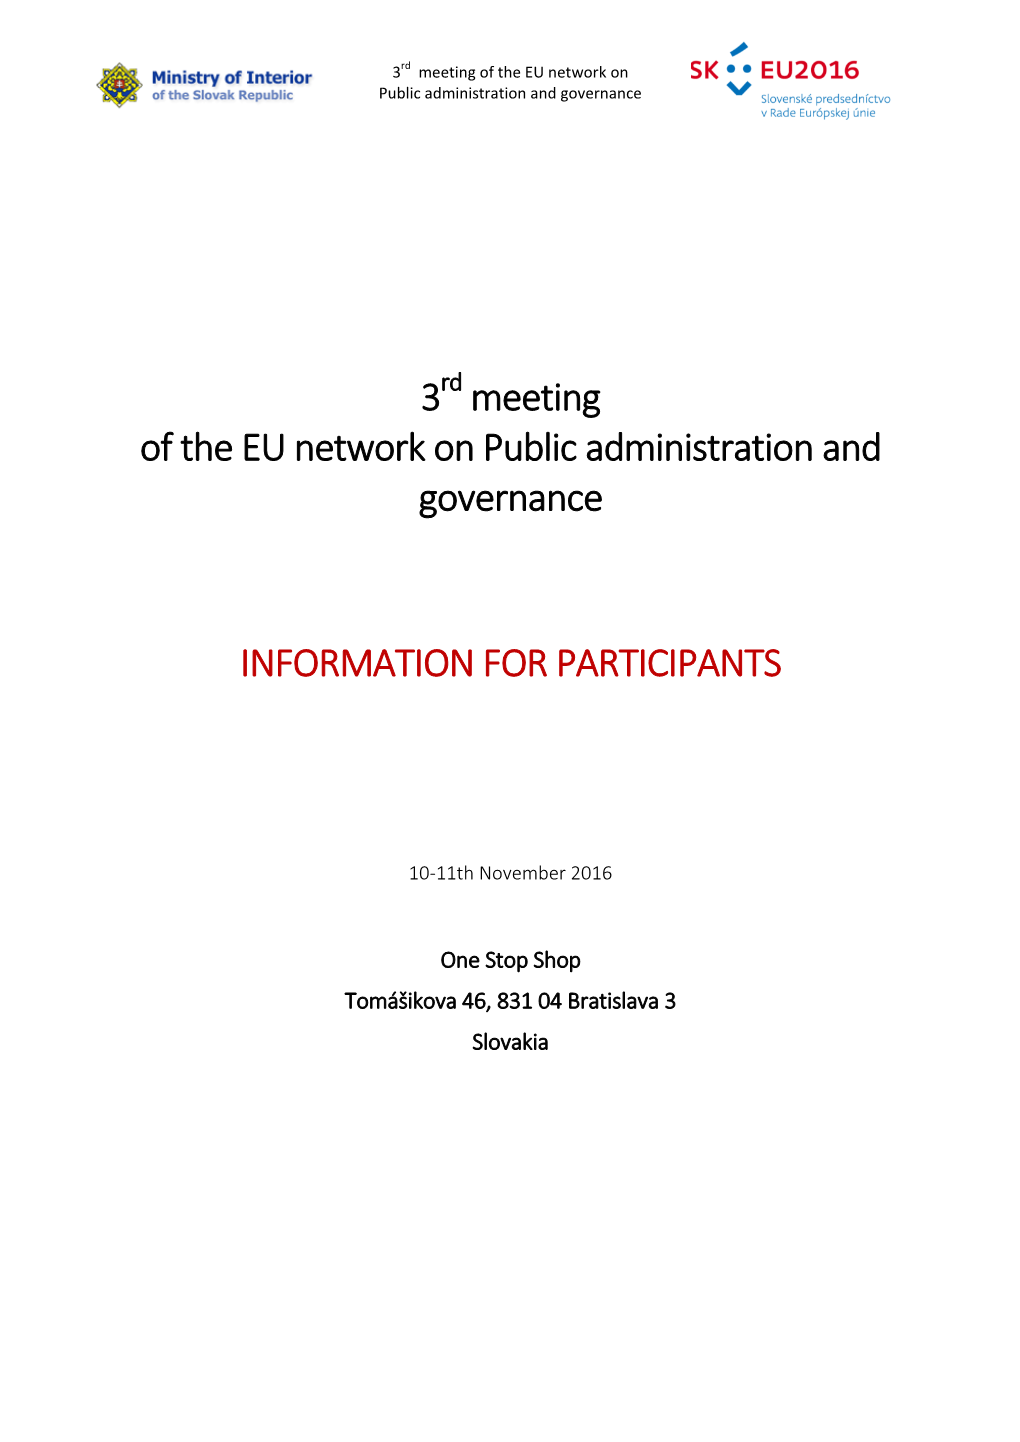 3 Meeting of the EU Network on Public Administration And